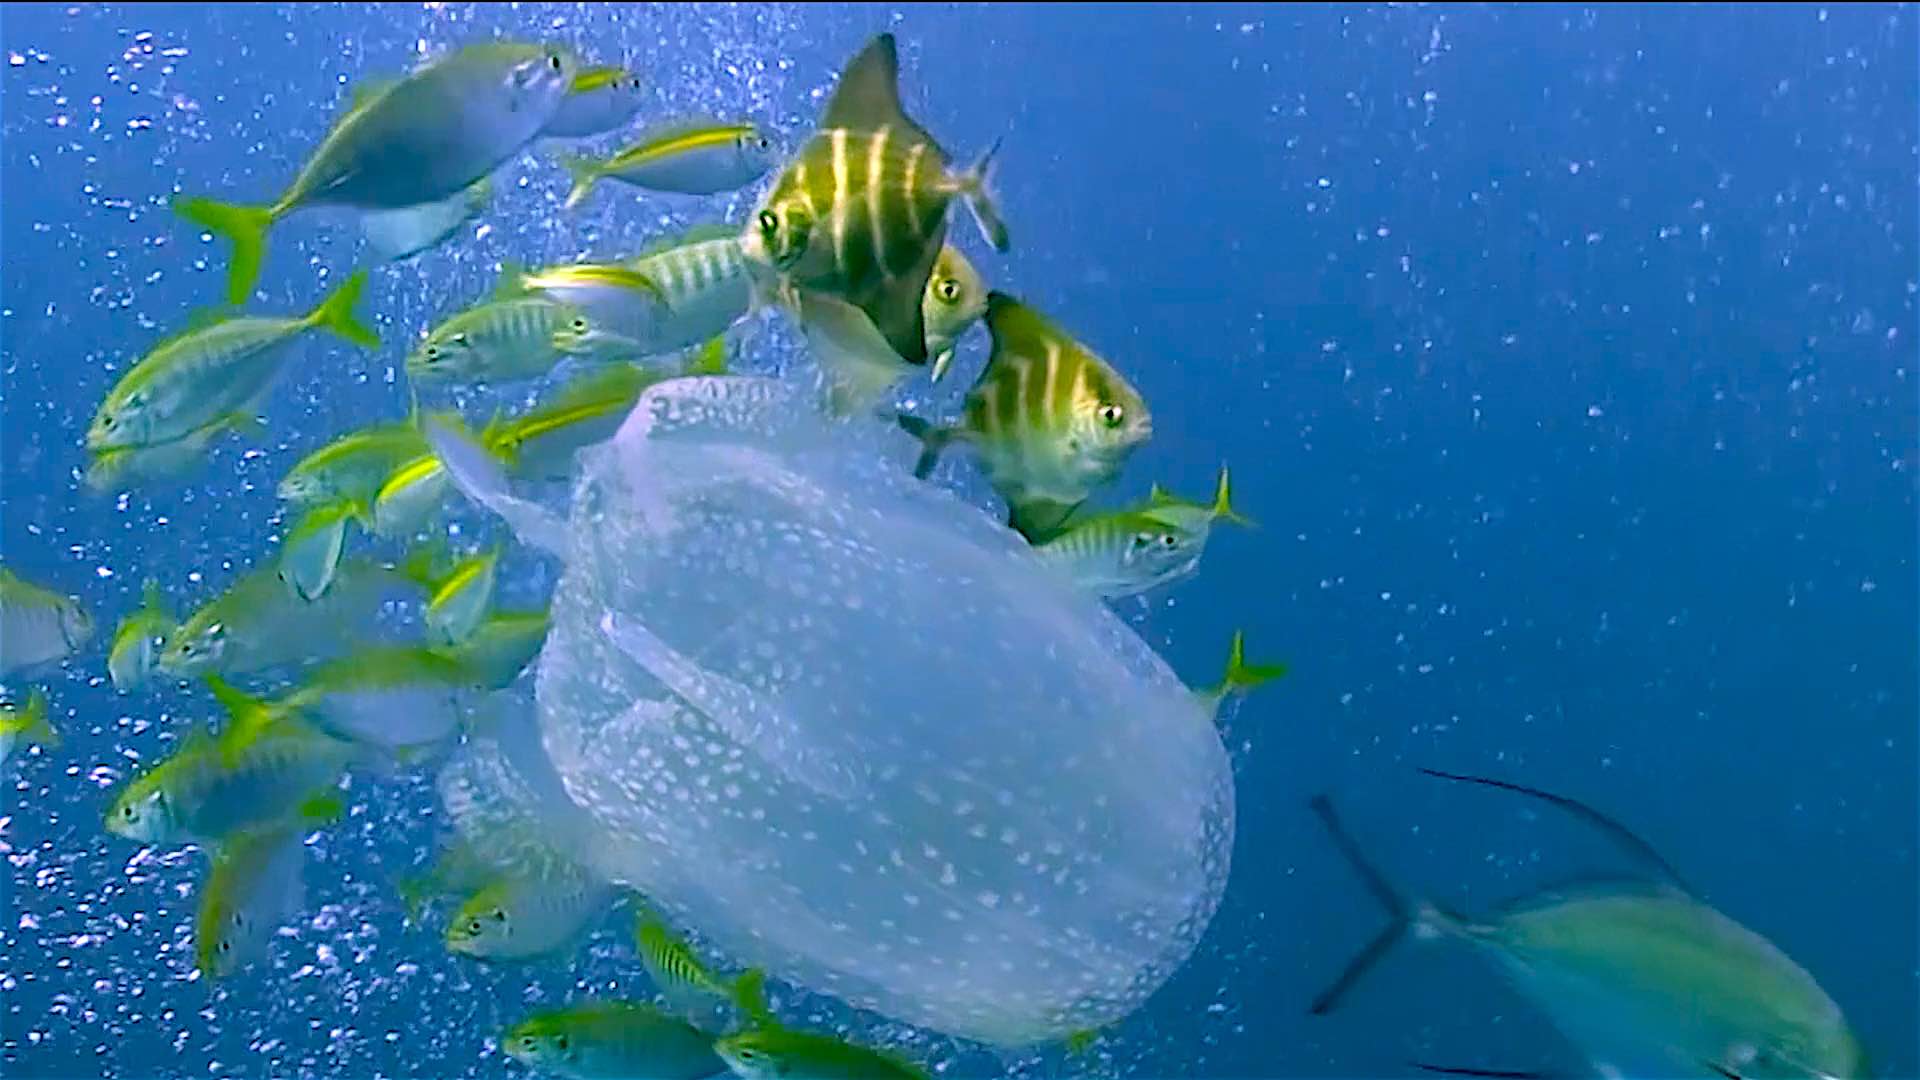 www.thefunkyturtle.com dive sites south west pinnacle koh tao box jellyfish